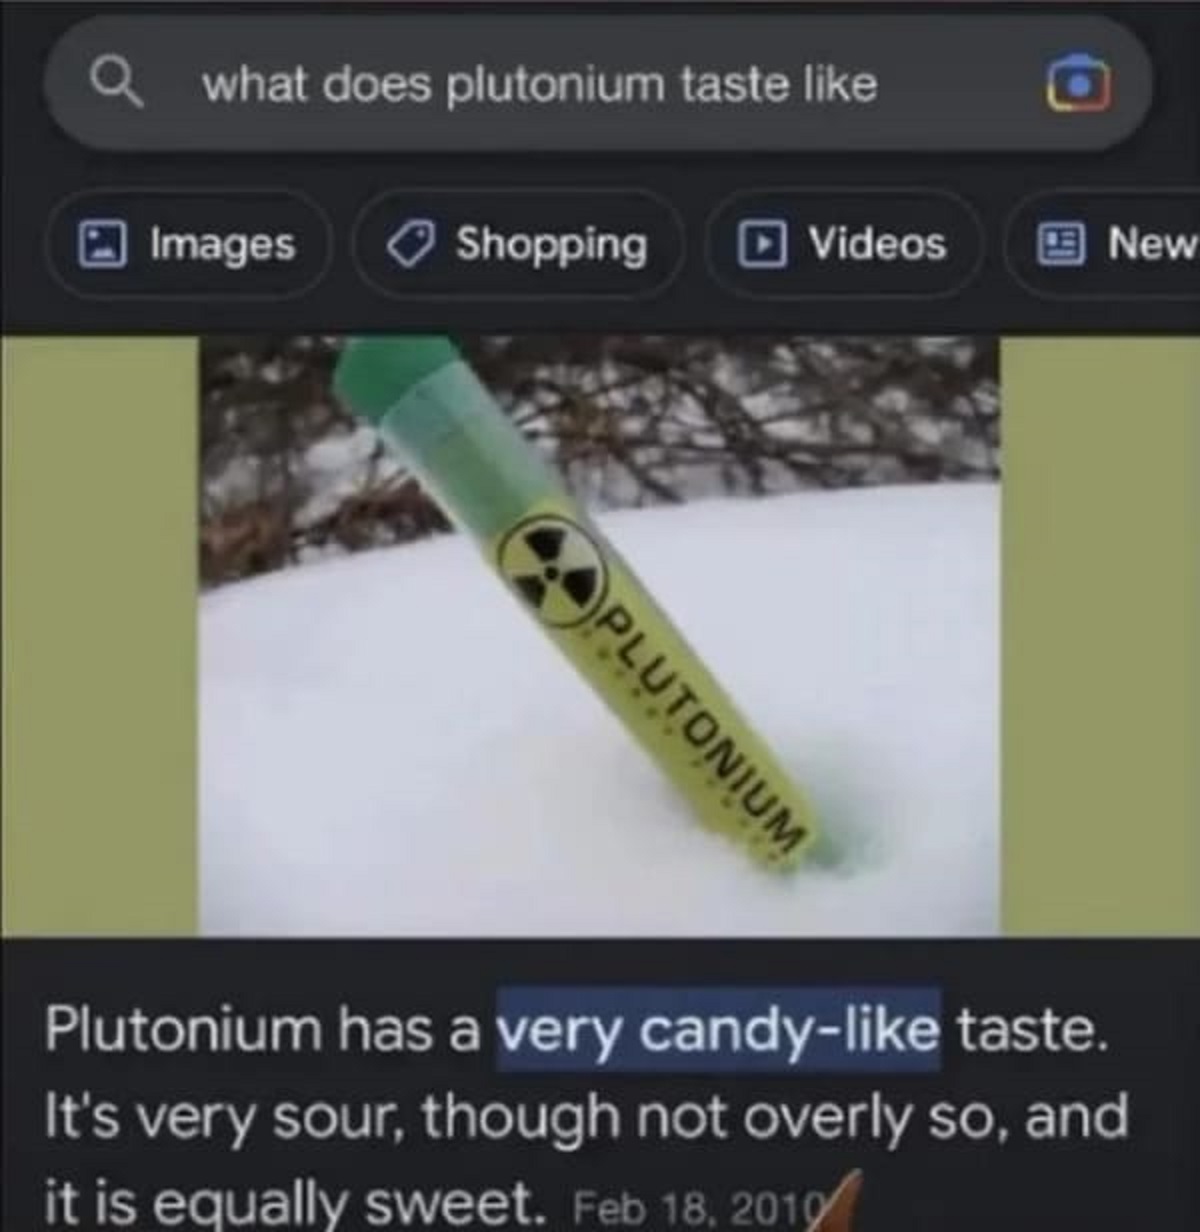 material - what does plutonium taste Images Shopping Videos Plutonium New Plutonium has a very candy taste. It's very sour, though not overly so, and it is equally sweet.